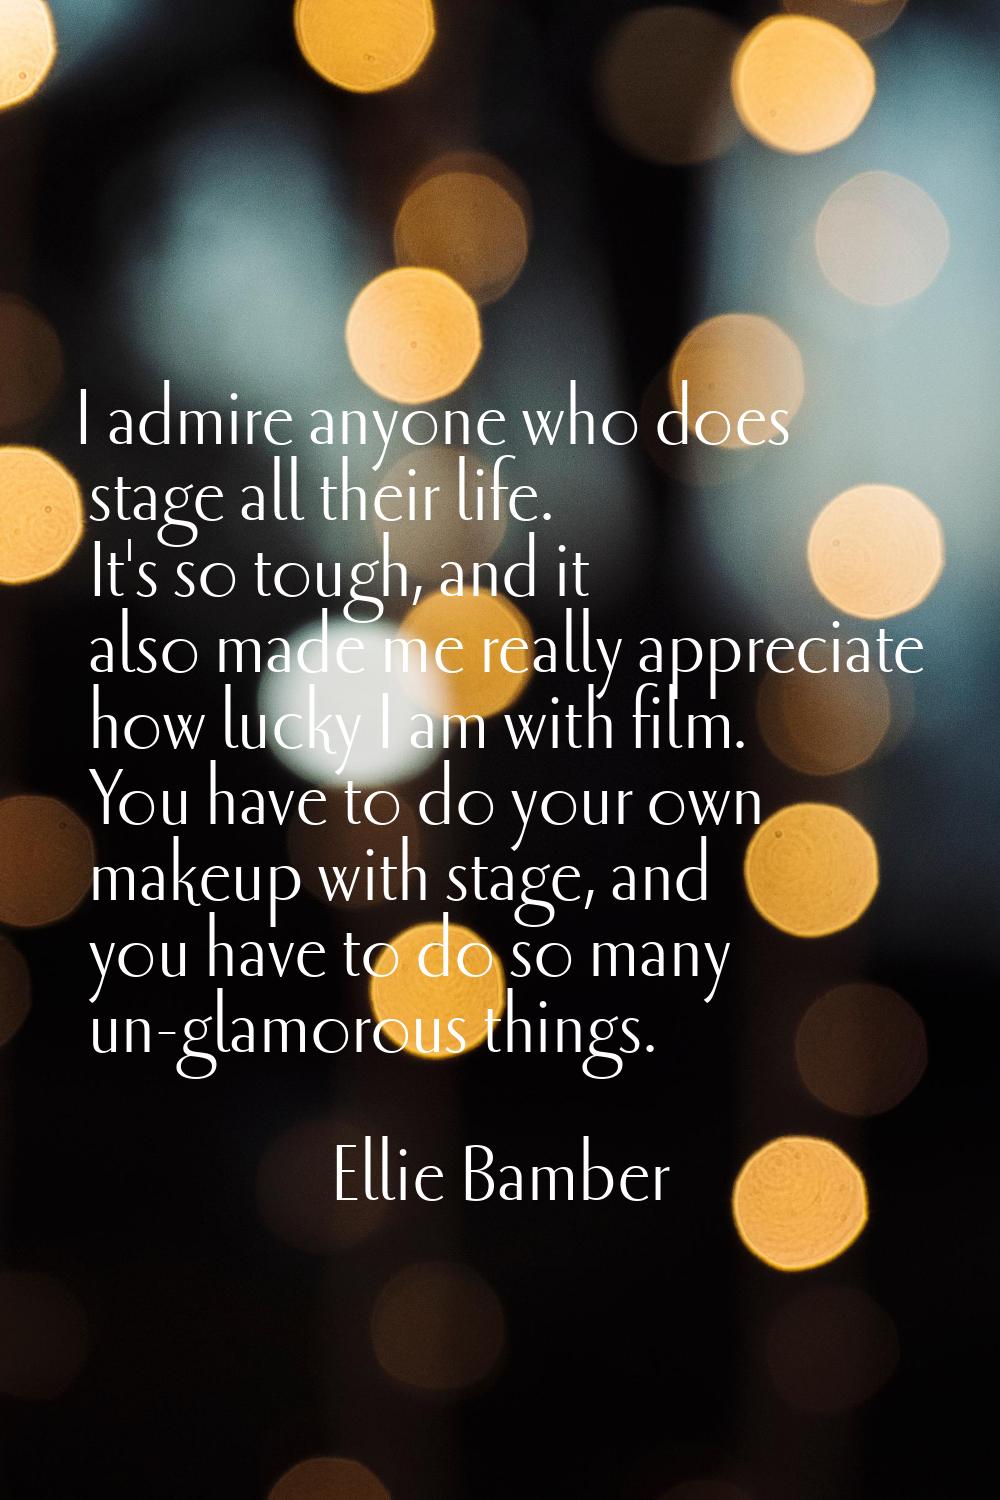 I admire anyone who does stage all their life. It's so tough, and it also made me really appreciate